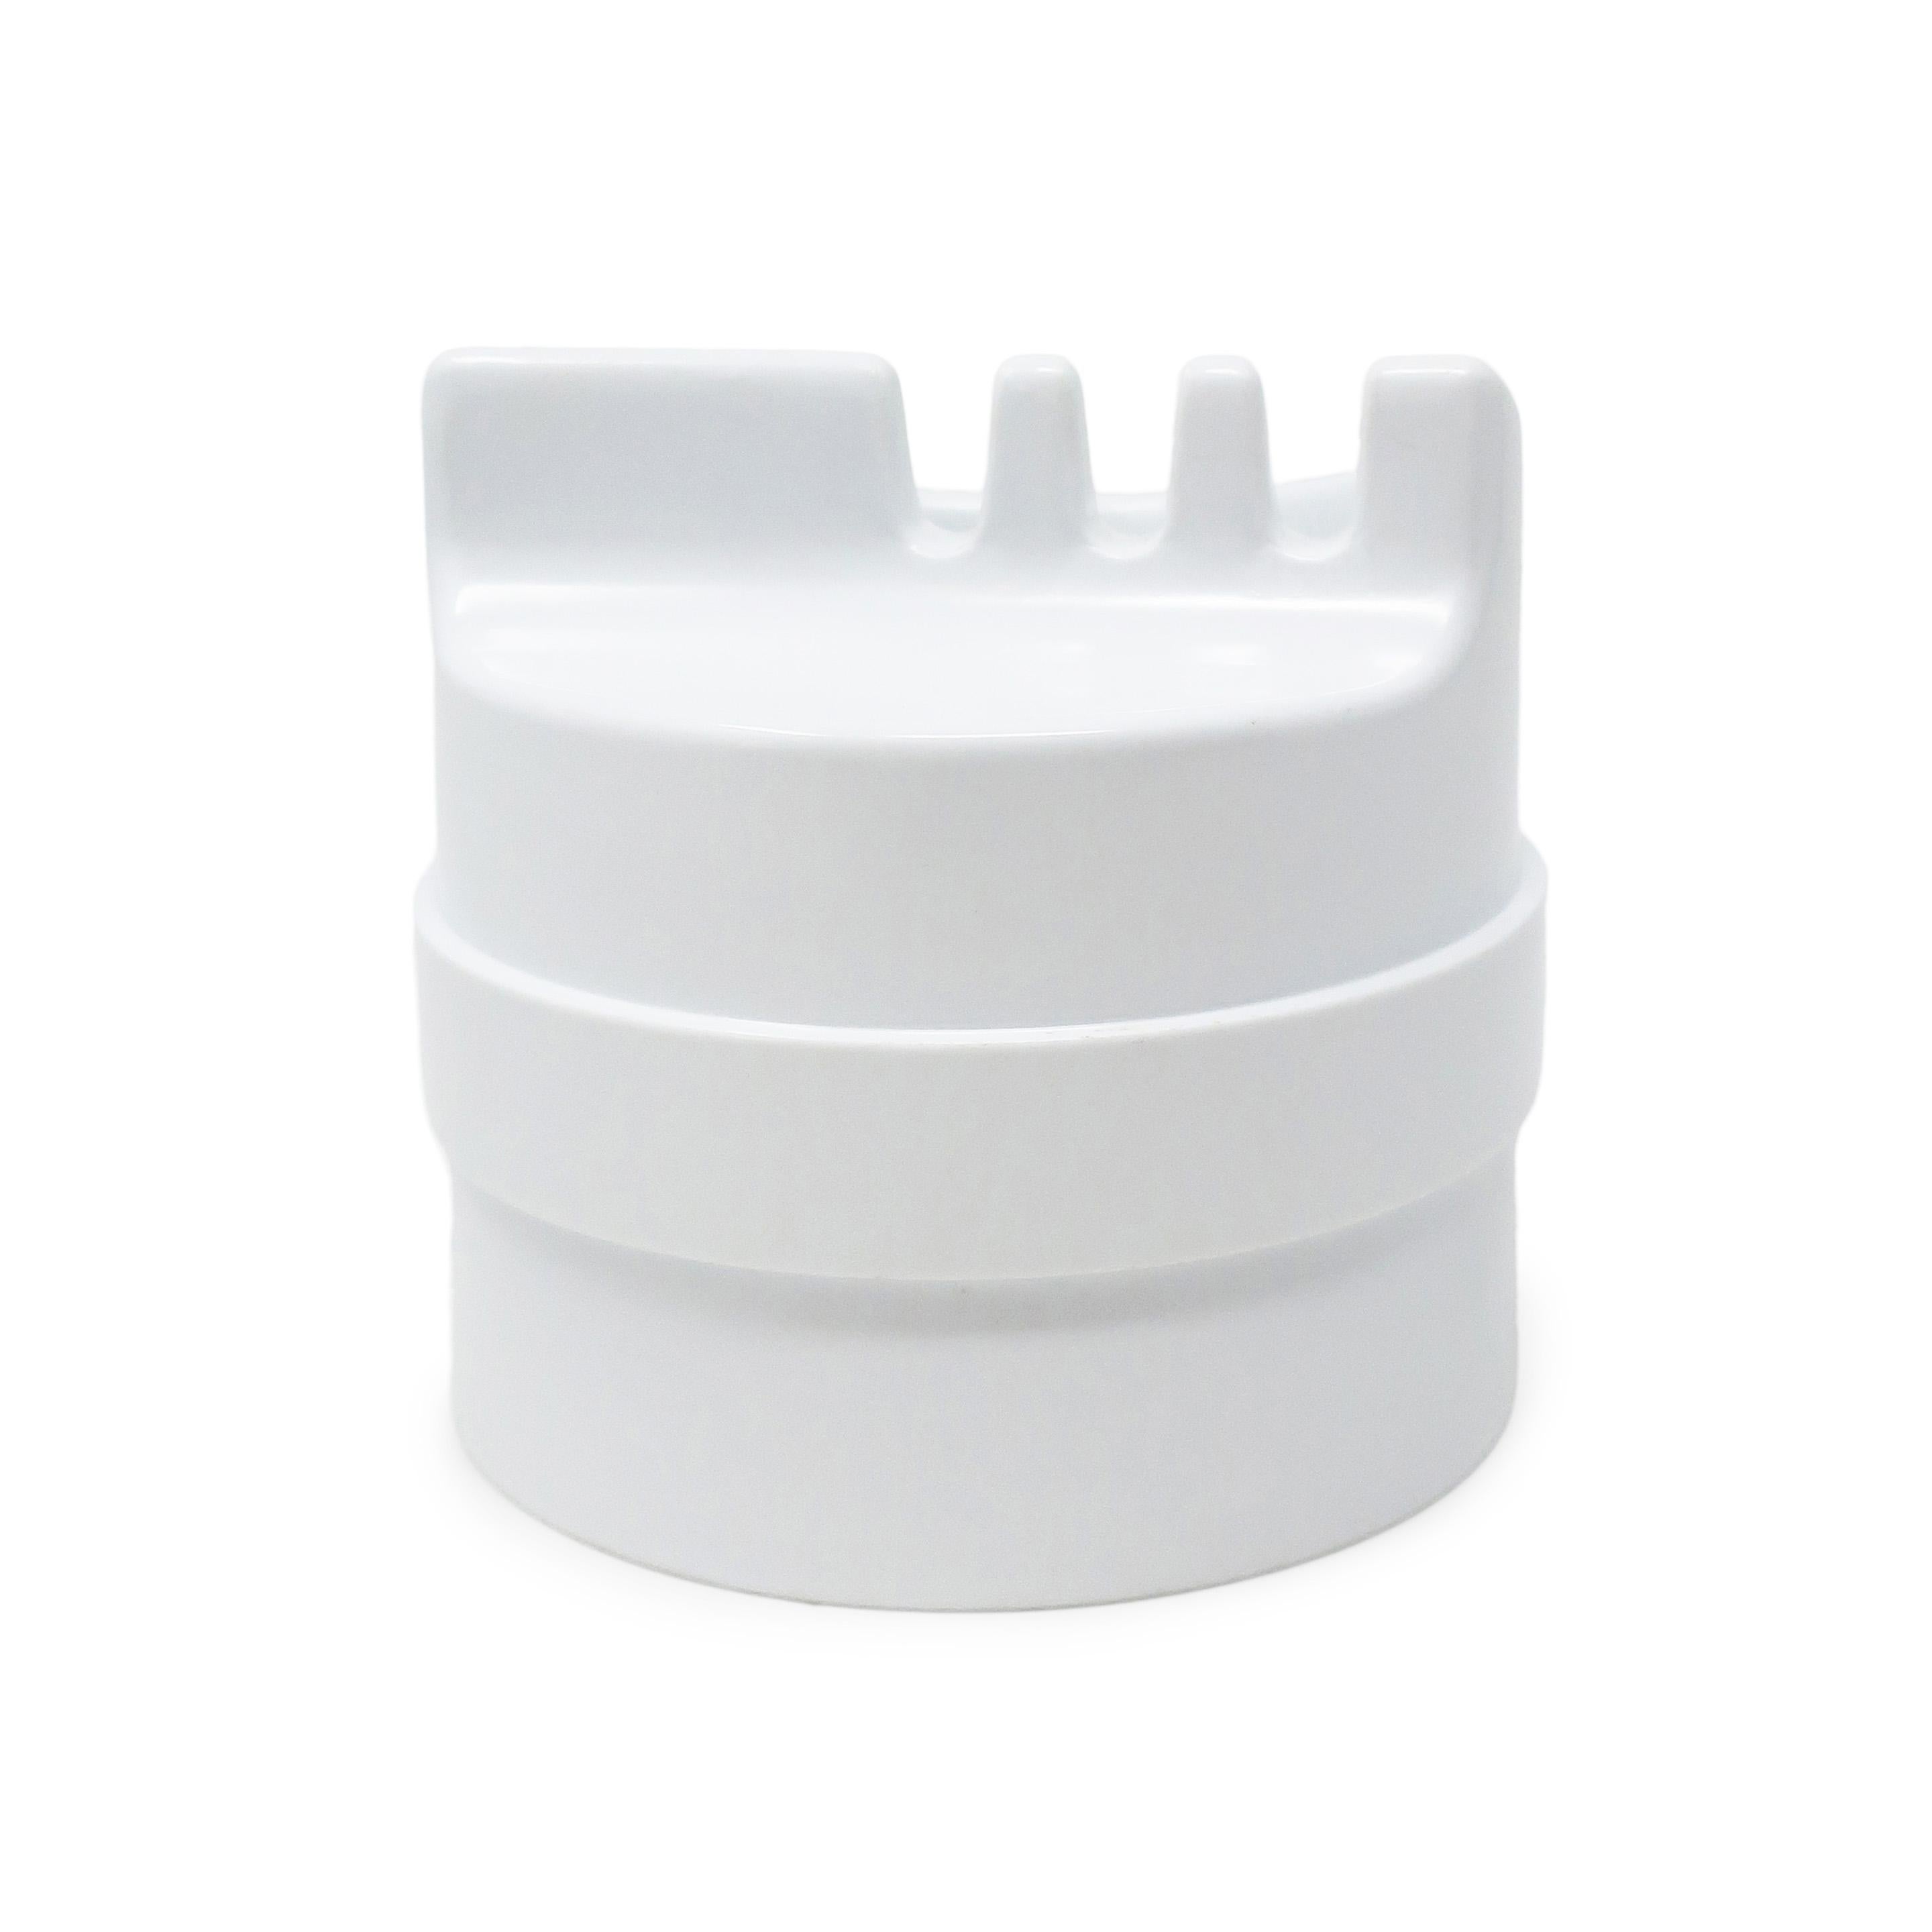 Mid-Century Modern White 4630 Roto Ashtray by Joe Colombo for Kartell For Sale